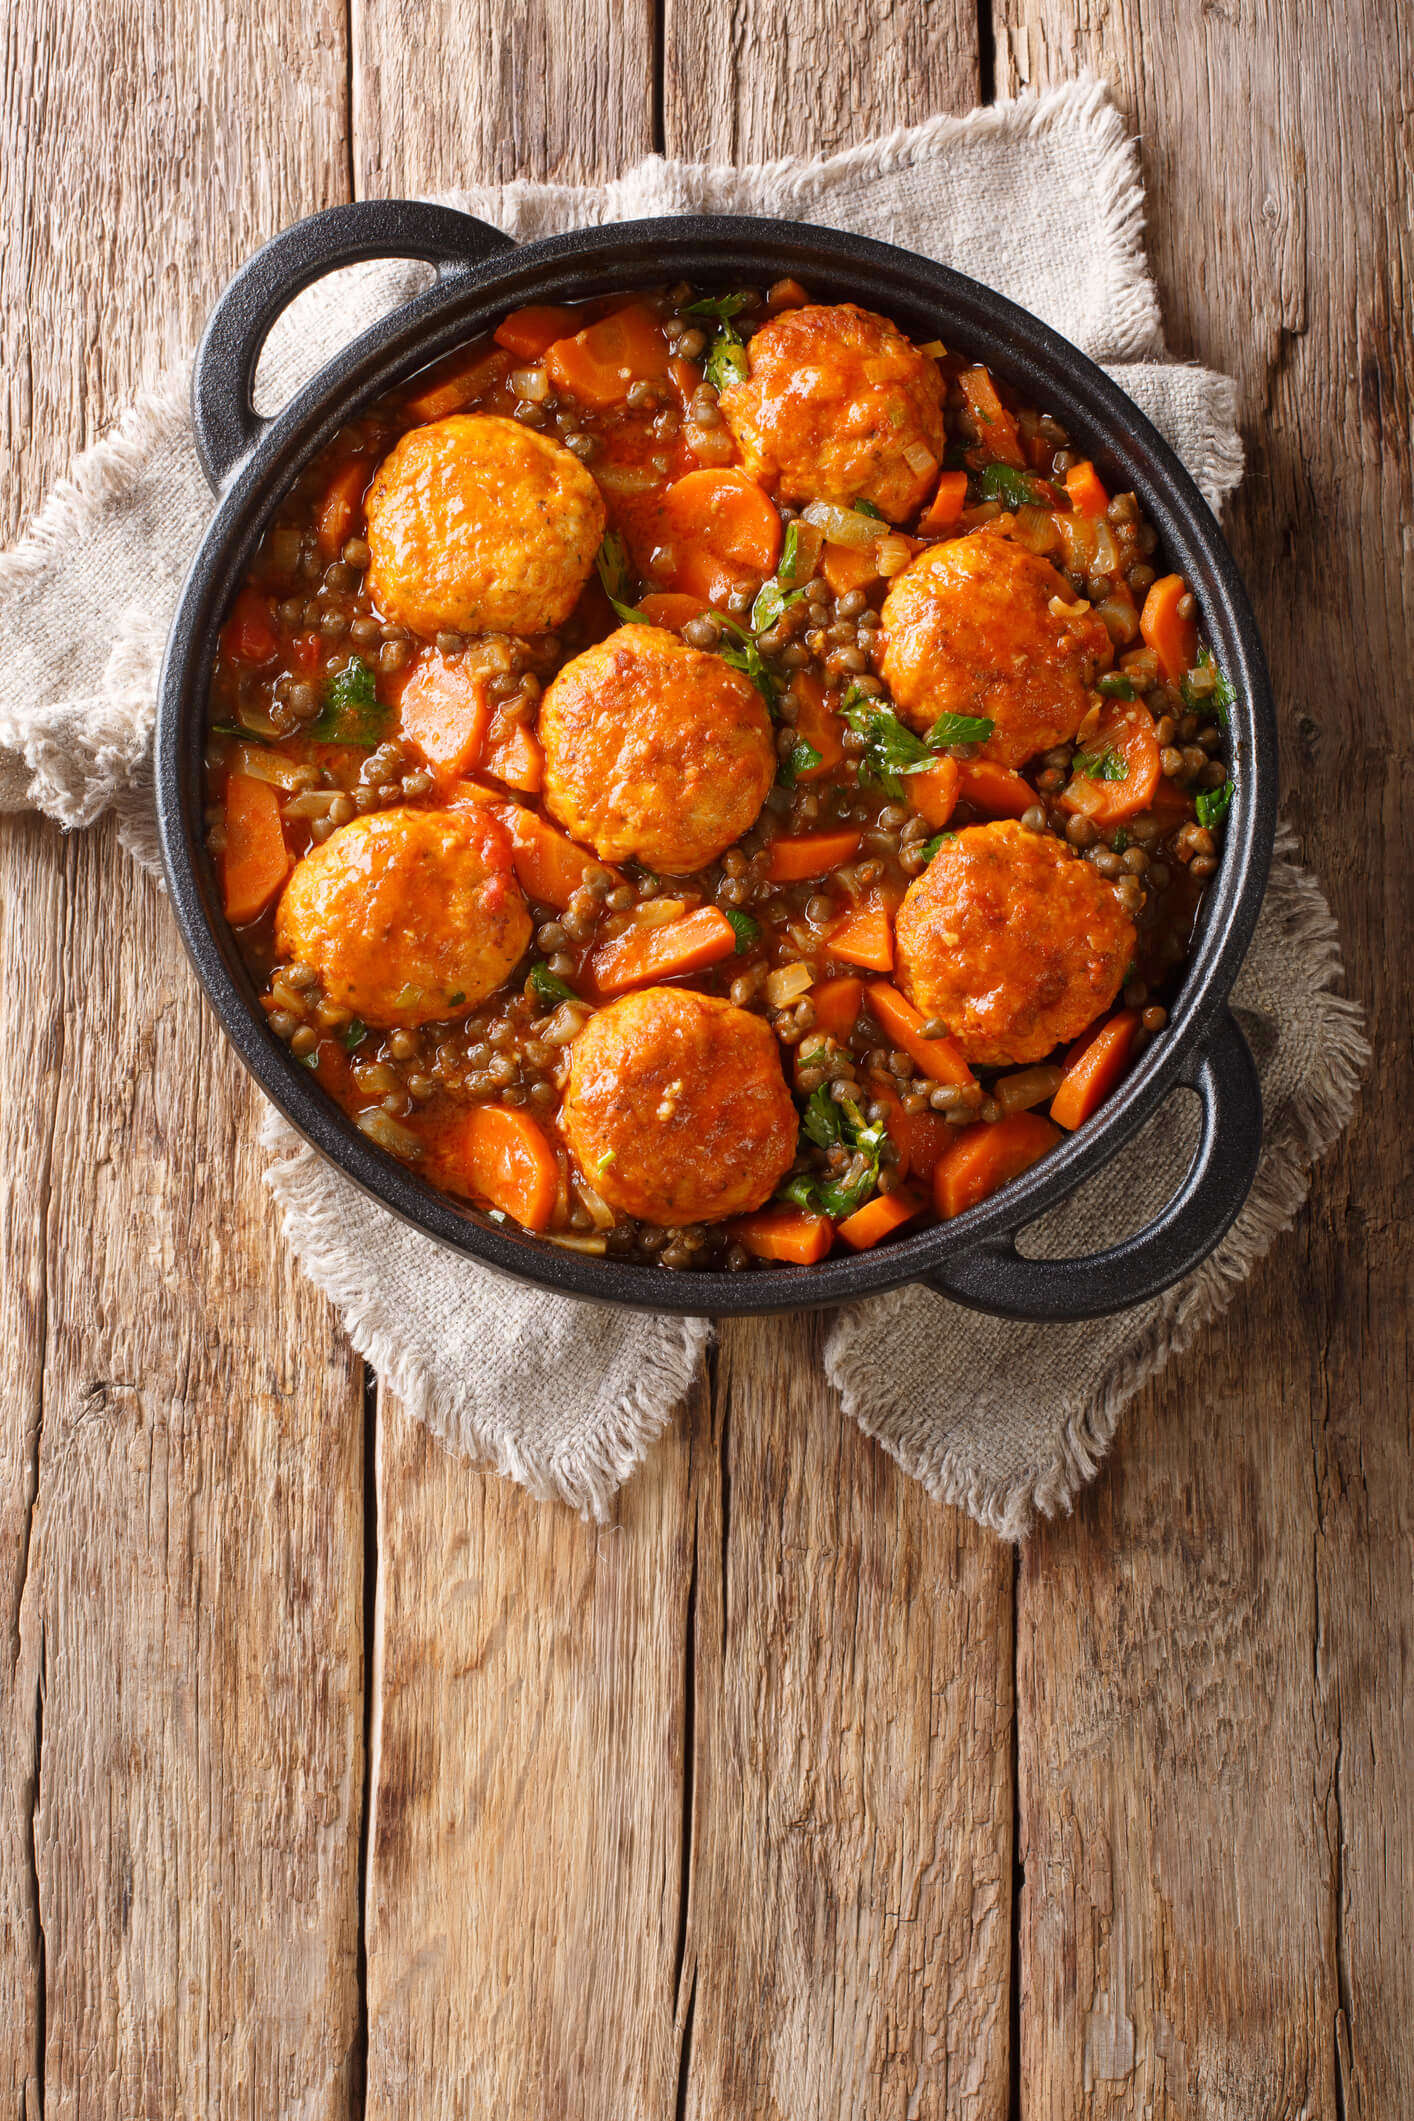 a homemade casserole in a black cooking pot on a wooden background